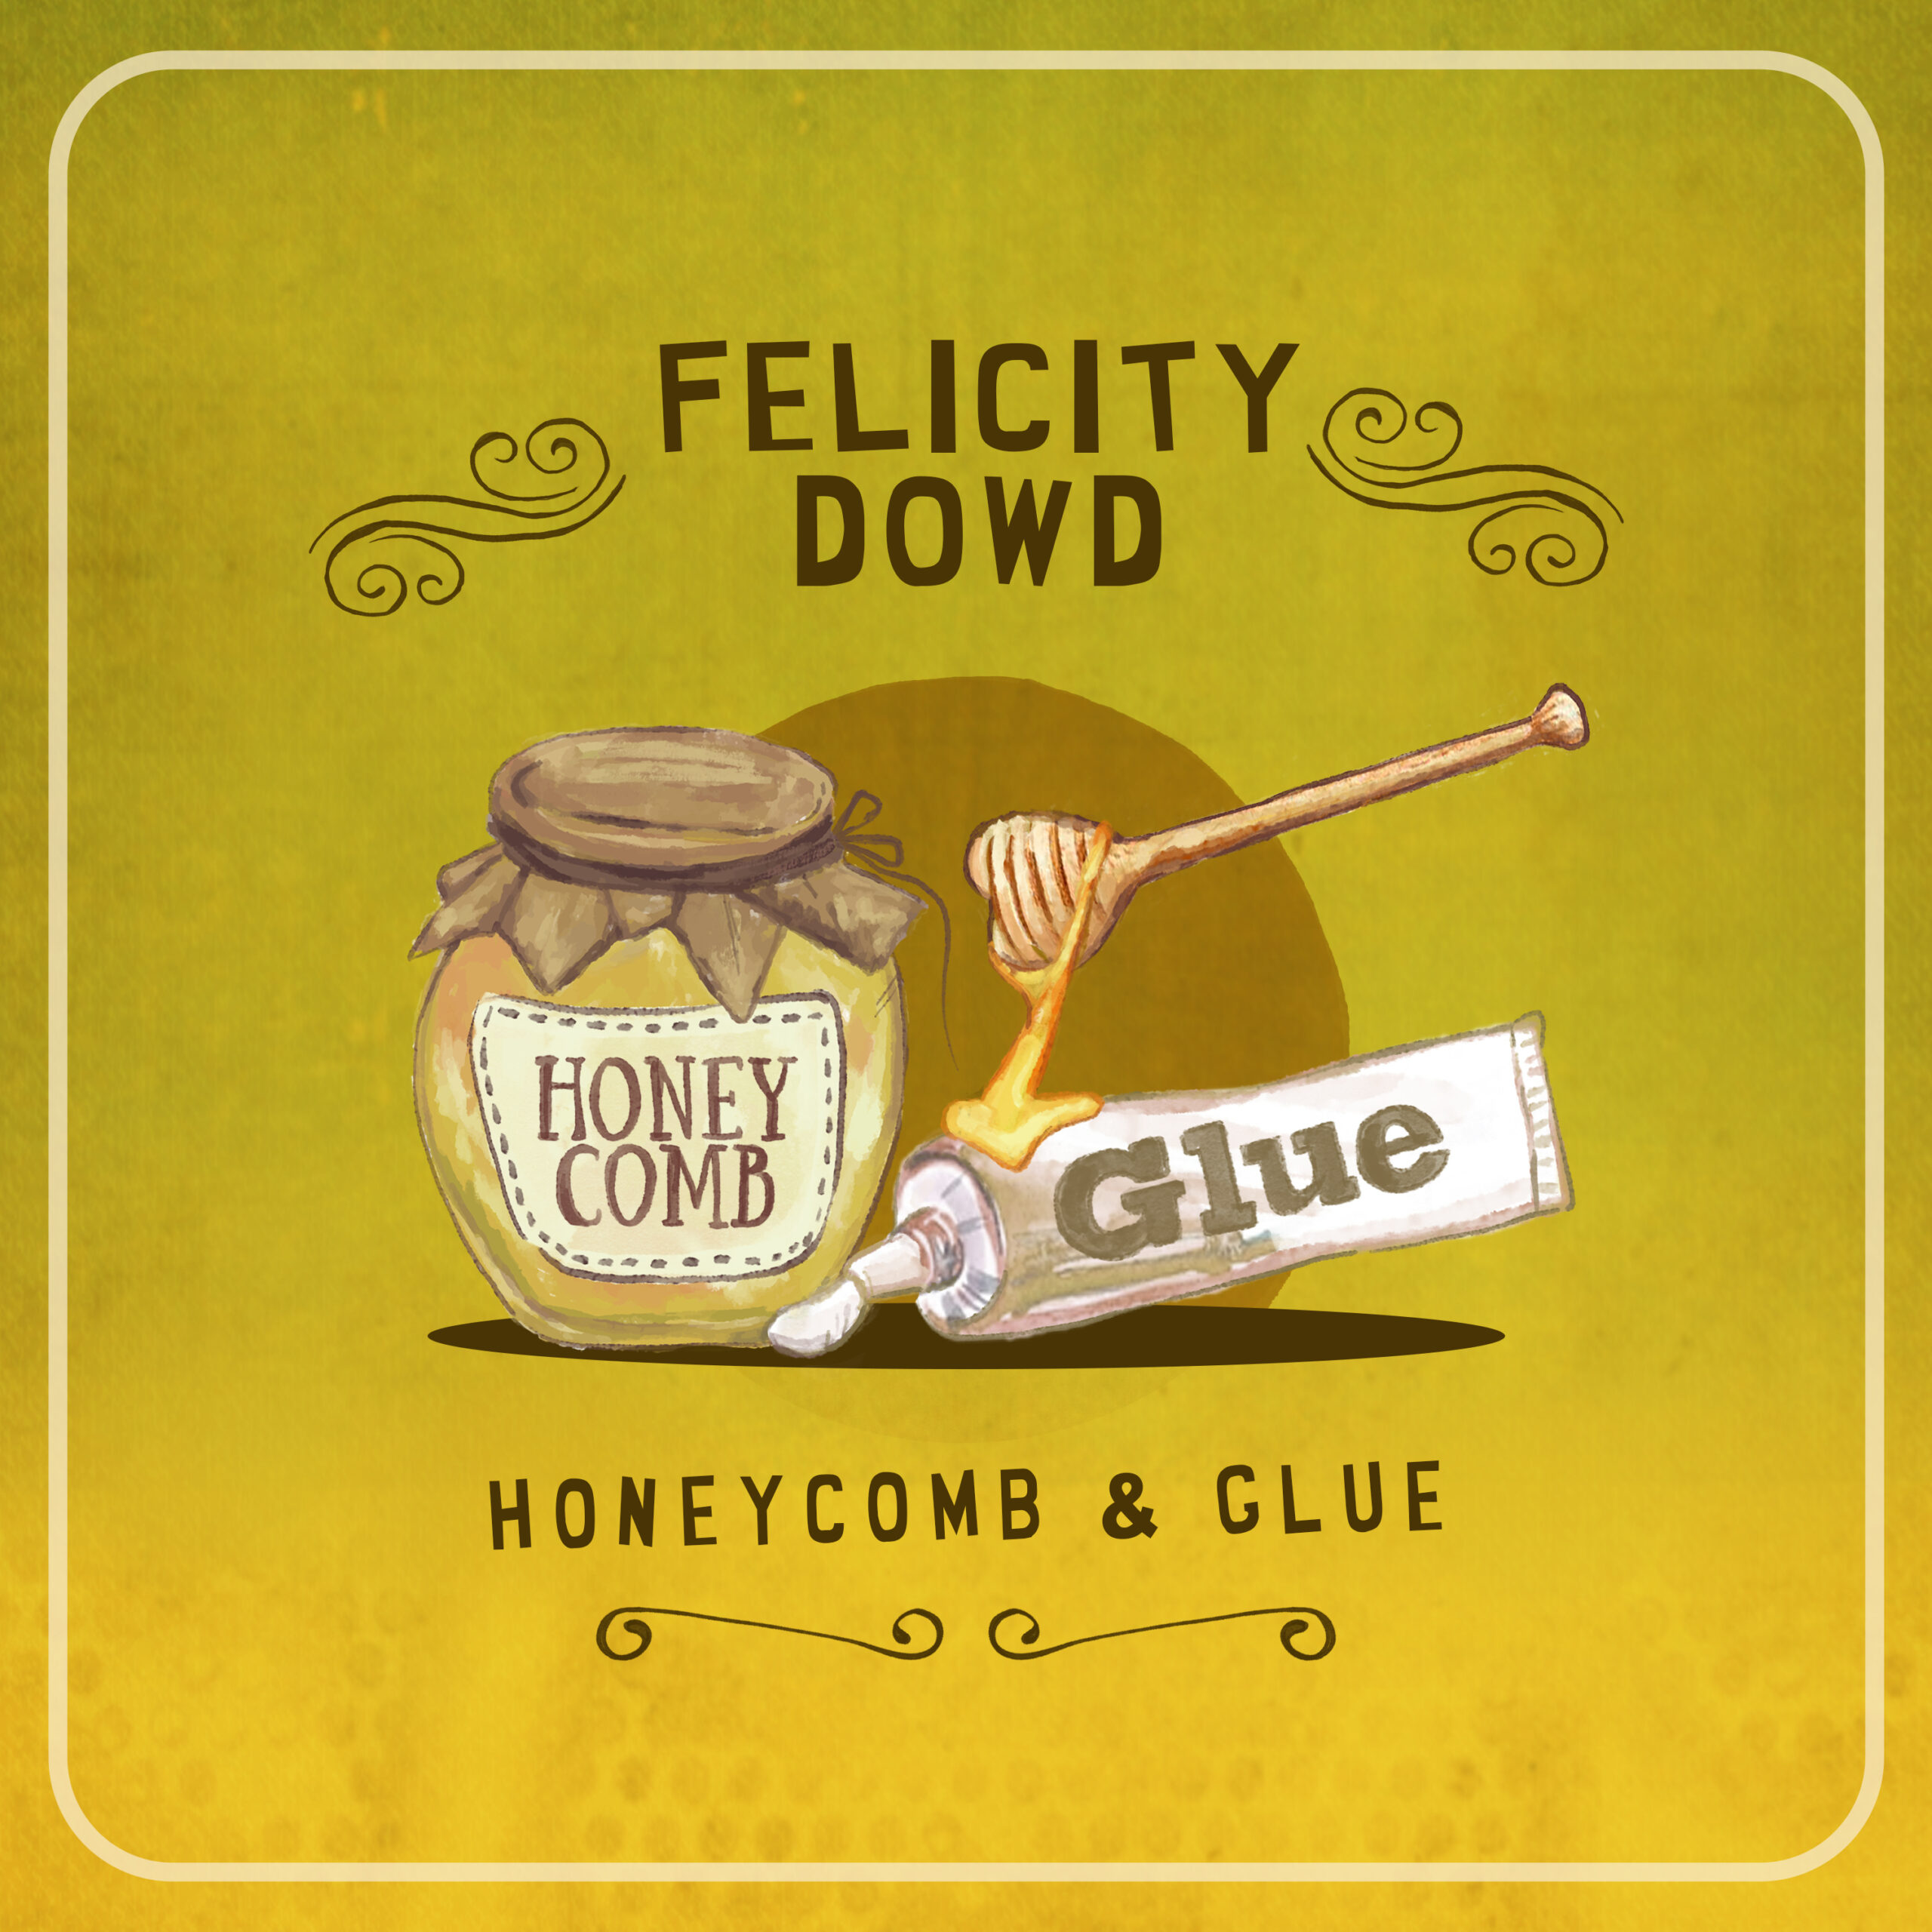 Honeycomb and glue – Show #290 (part 1), 6 August 2023